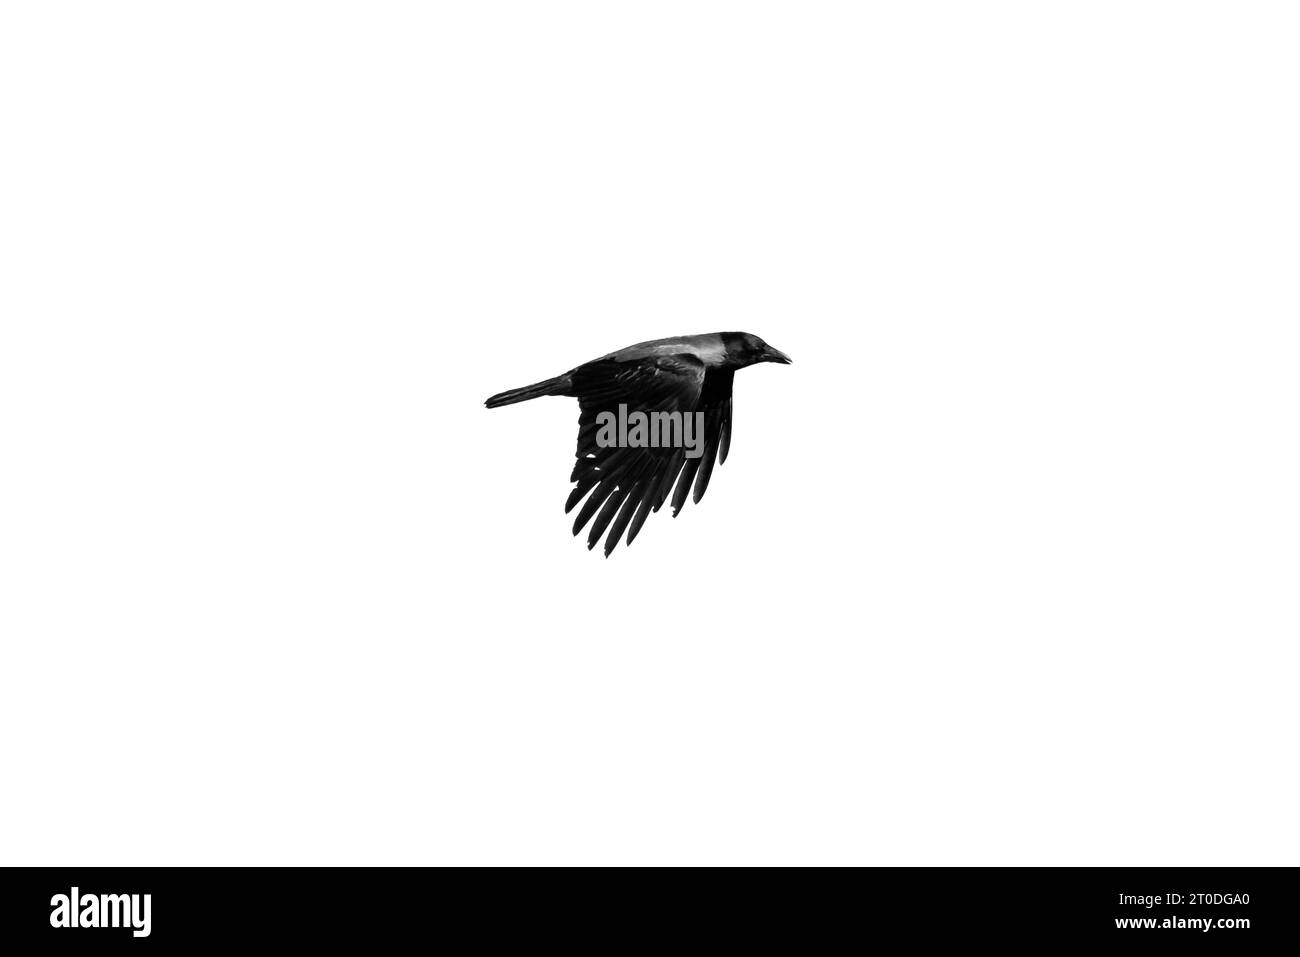 Black crow flies in the sky, close up photo isolated on white background Stock Photo